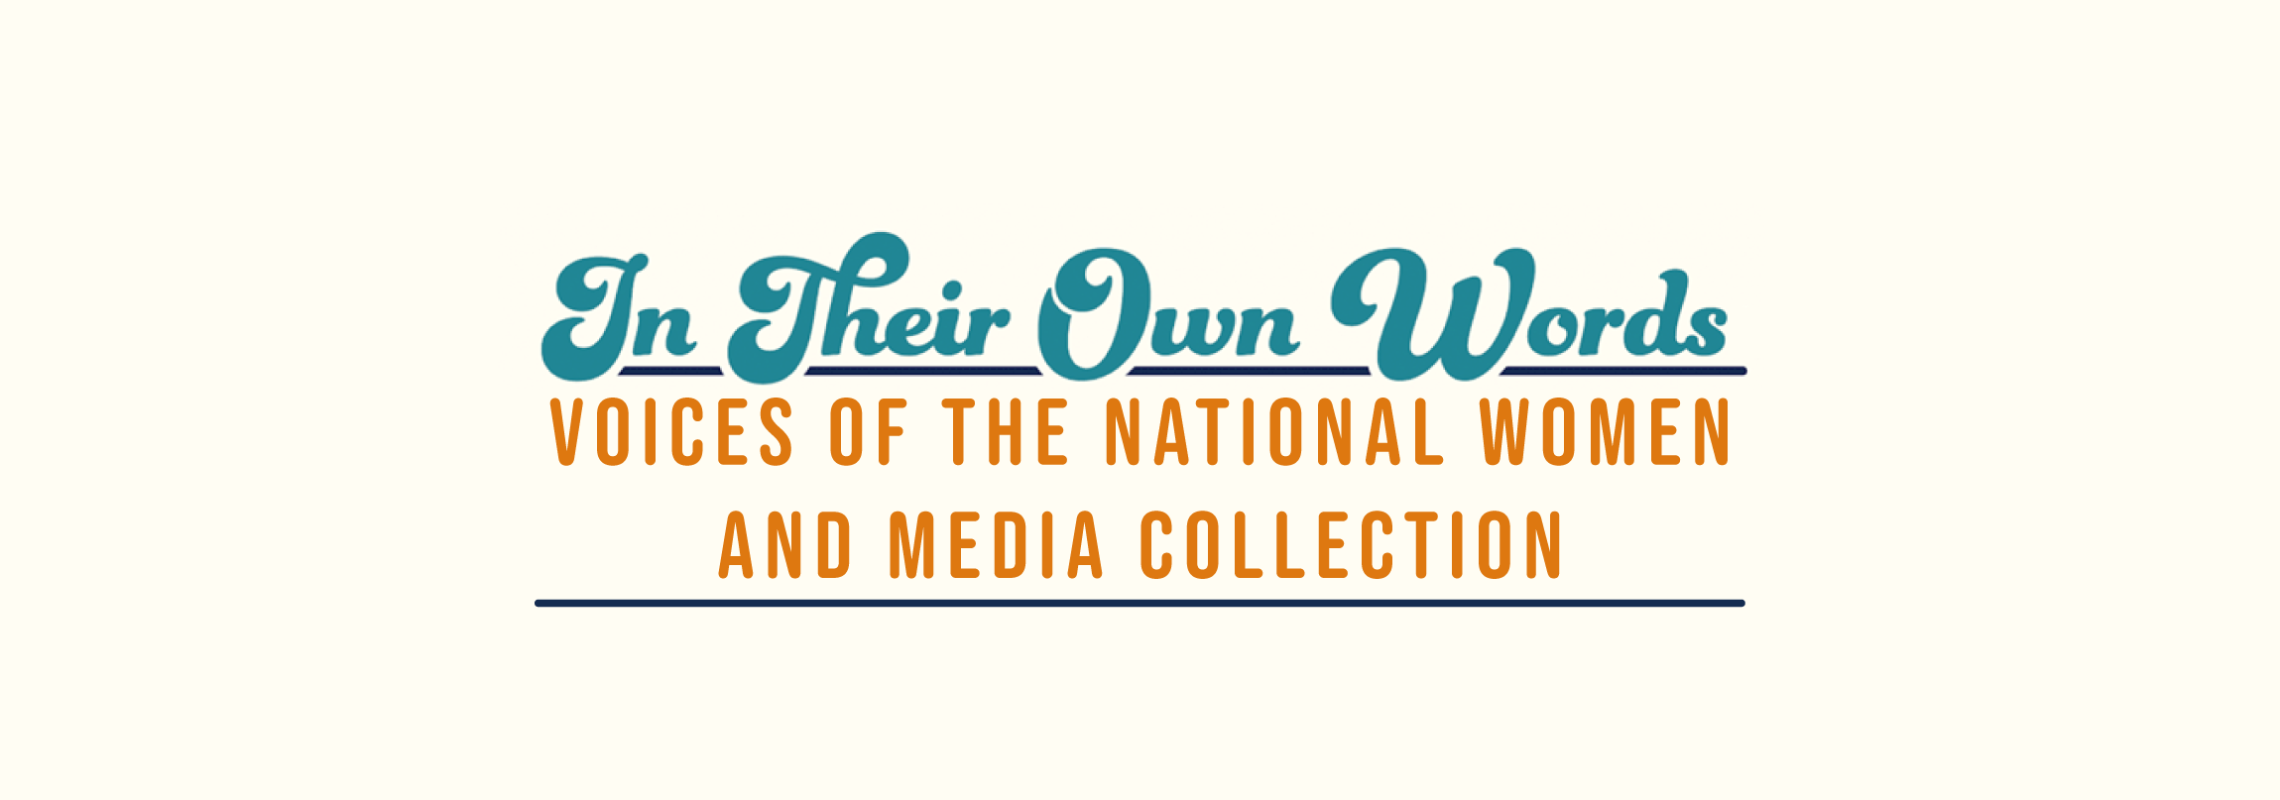 Reads In Their Own Words, Voices of the National Women and Media Collection